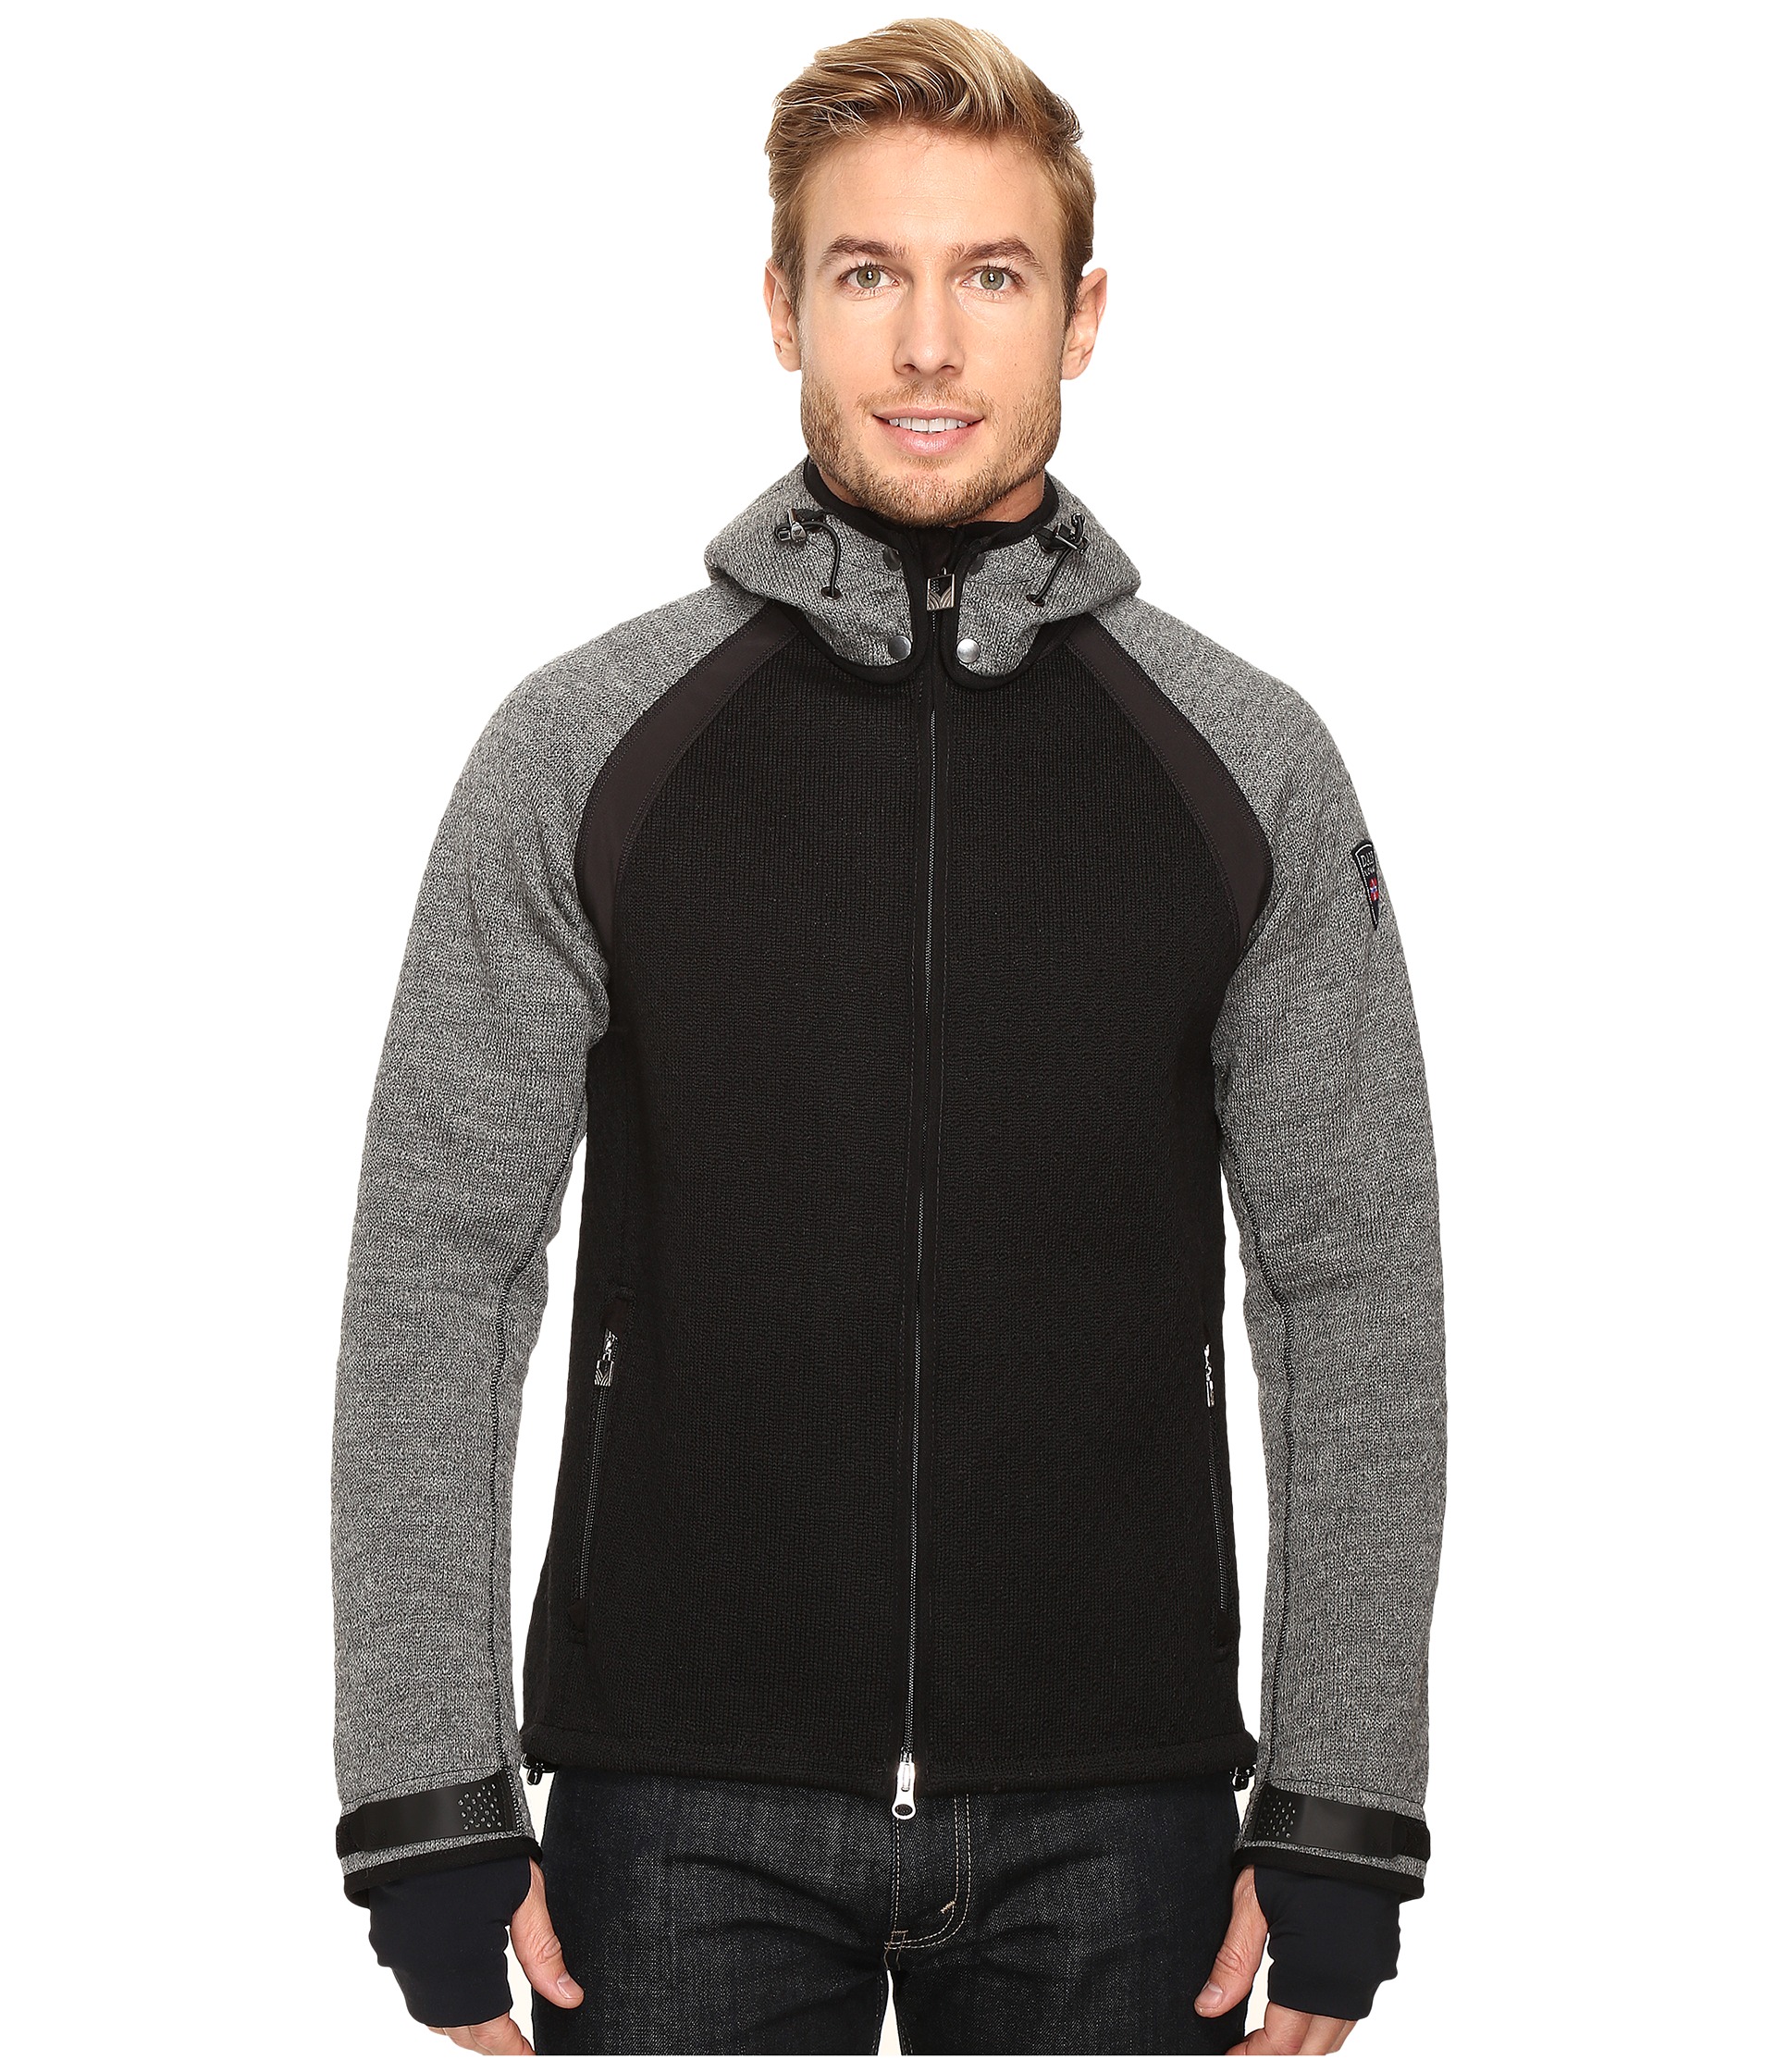 Dale of Norway Jotunheimen Jacket at Zappos.com